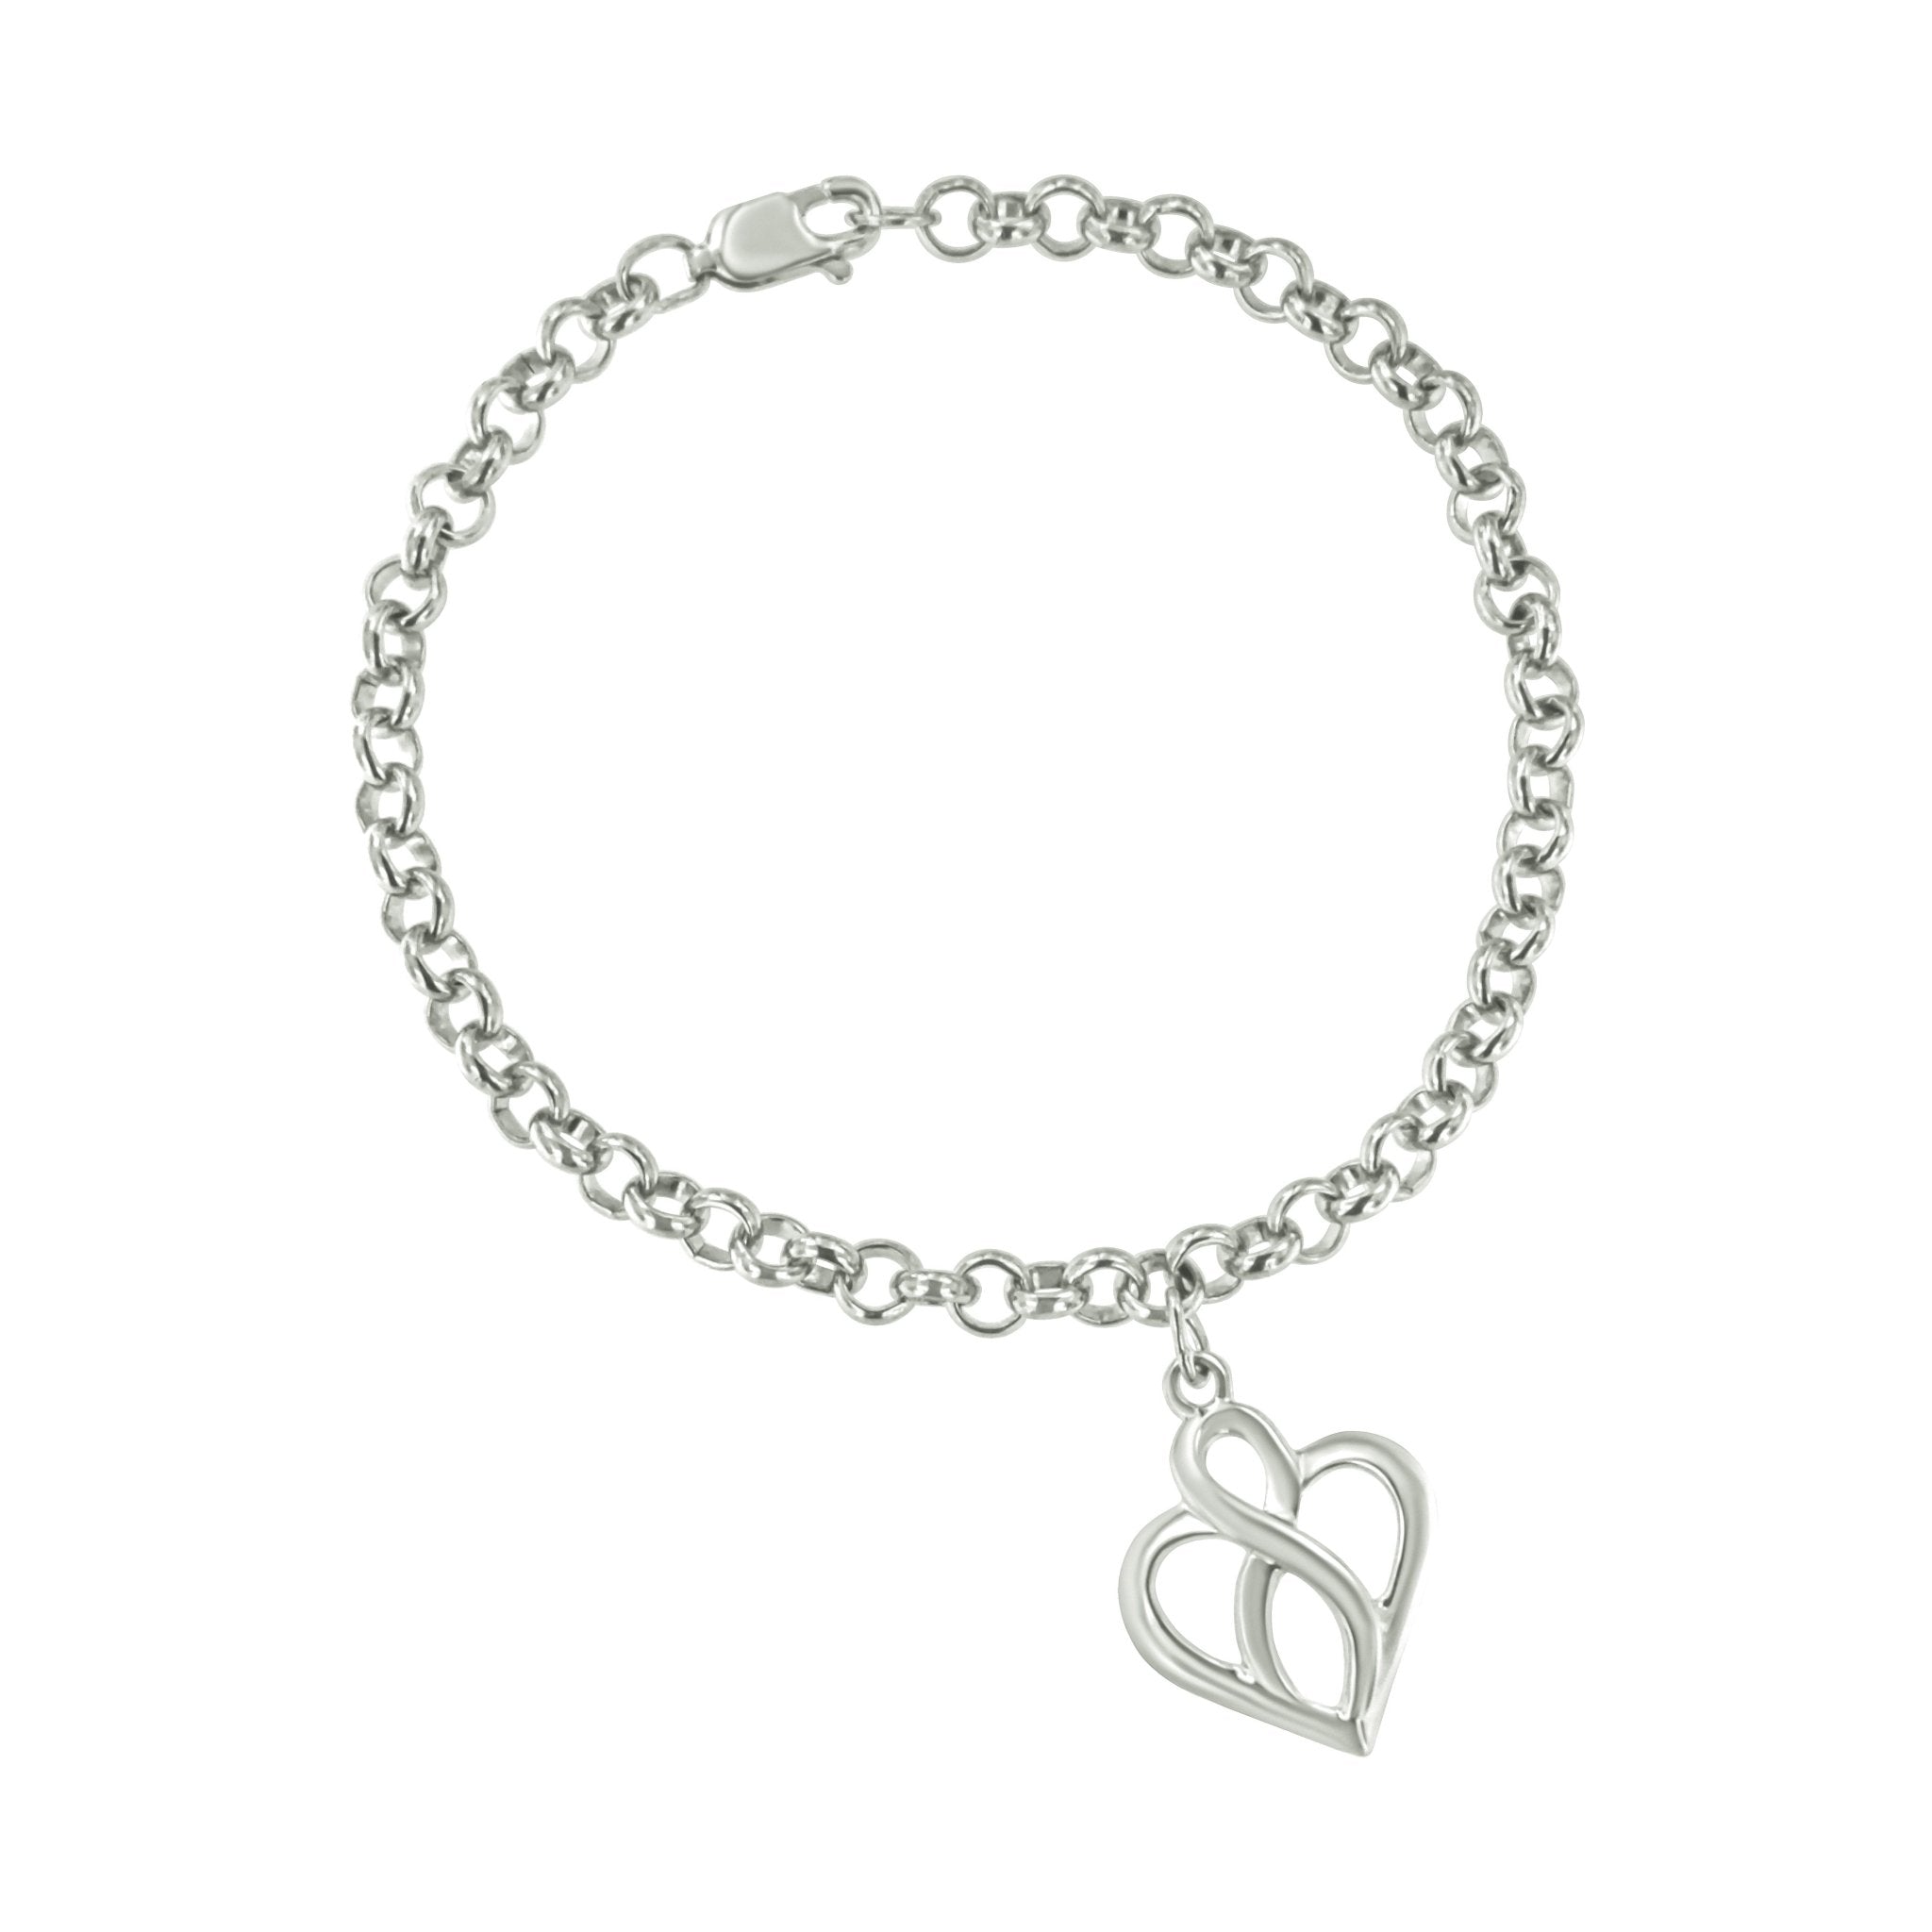 .925 Sterling Silver Open Heart With Center Vertical Infinity Chain Charm Bracelet - Size 7